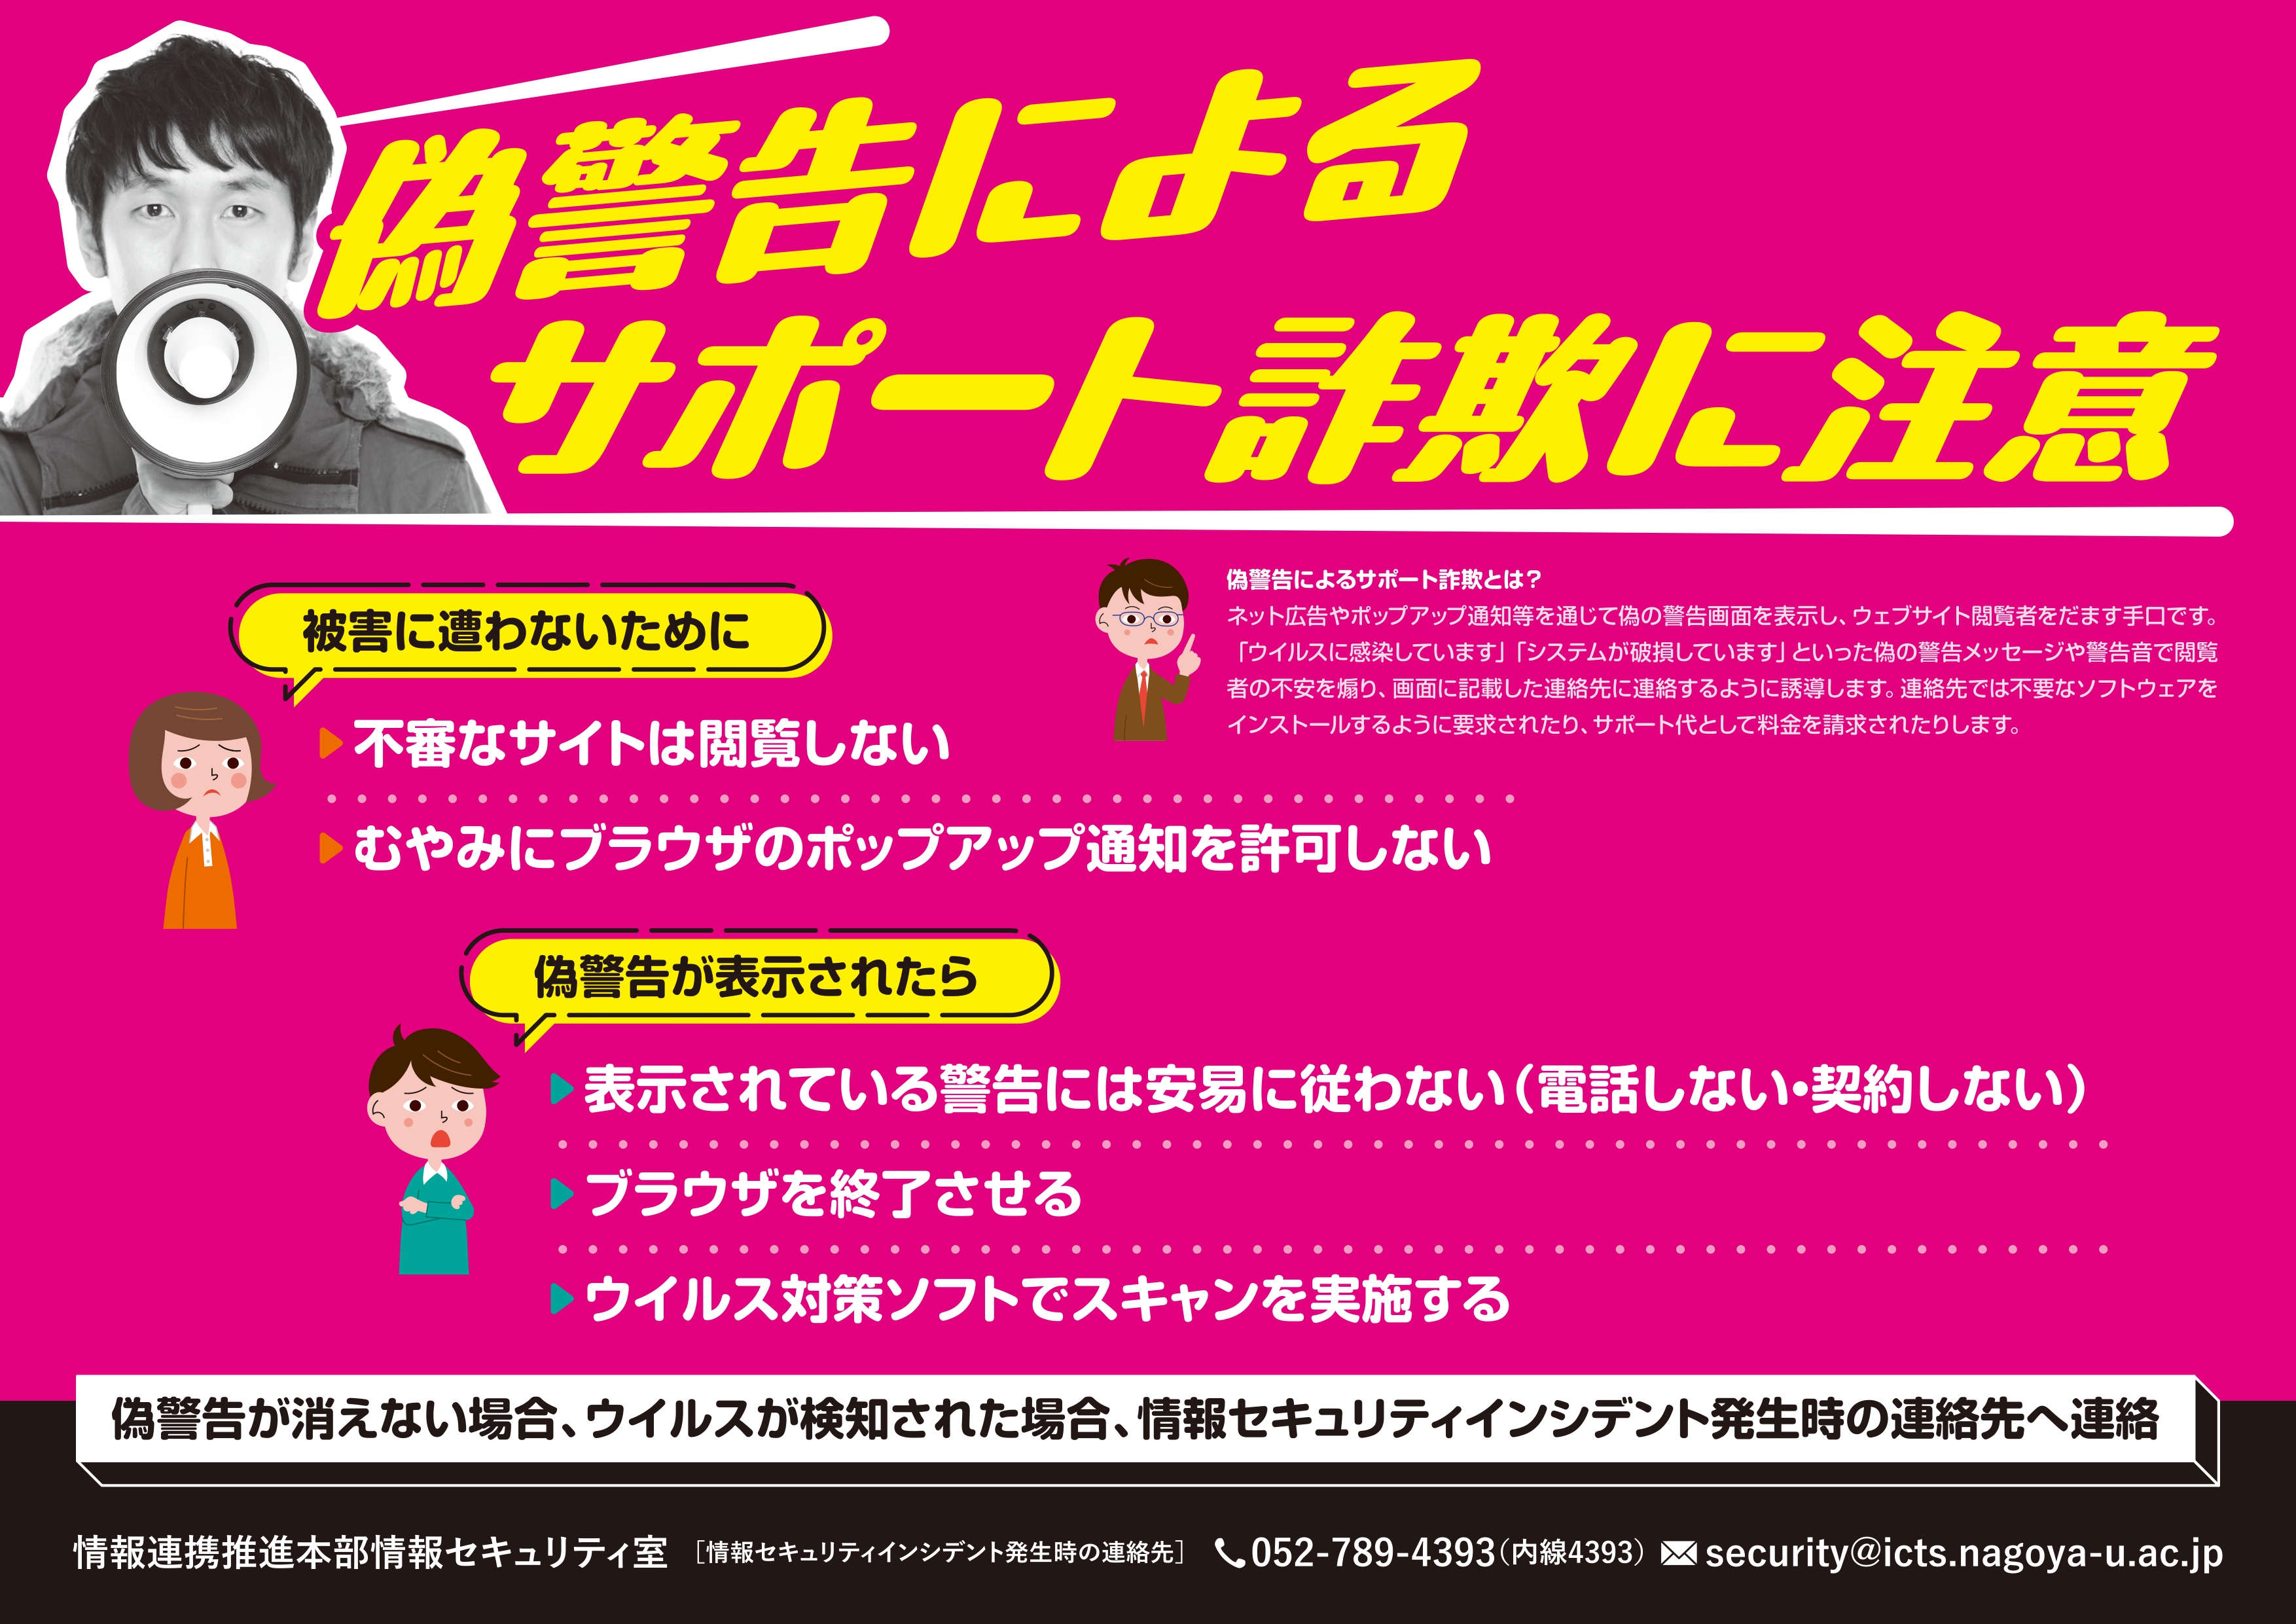 Japanese Poster of Information Security